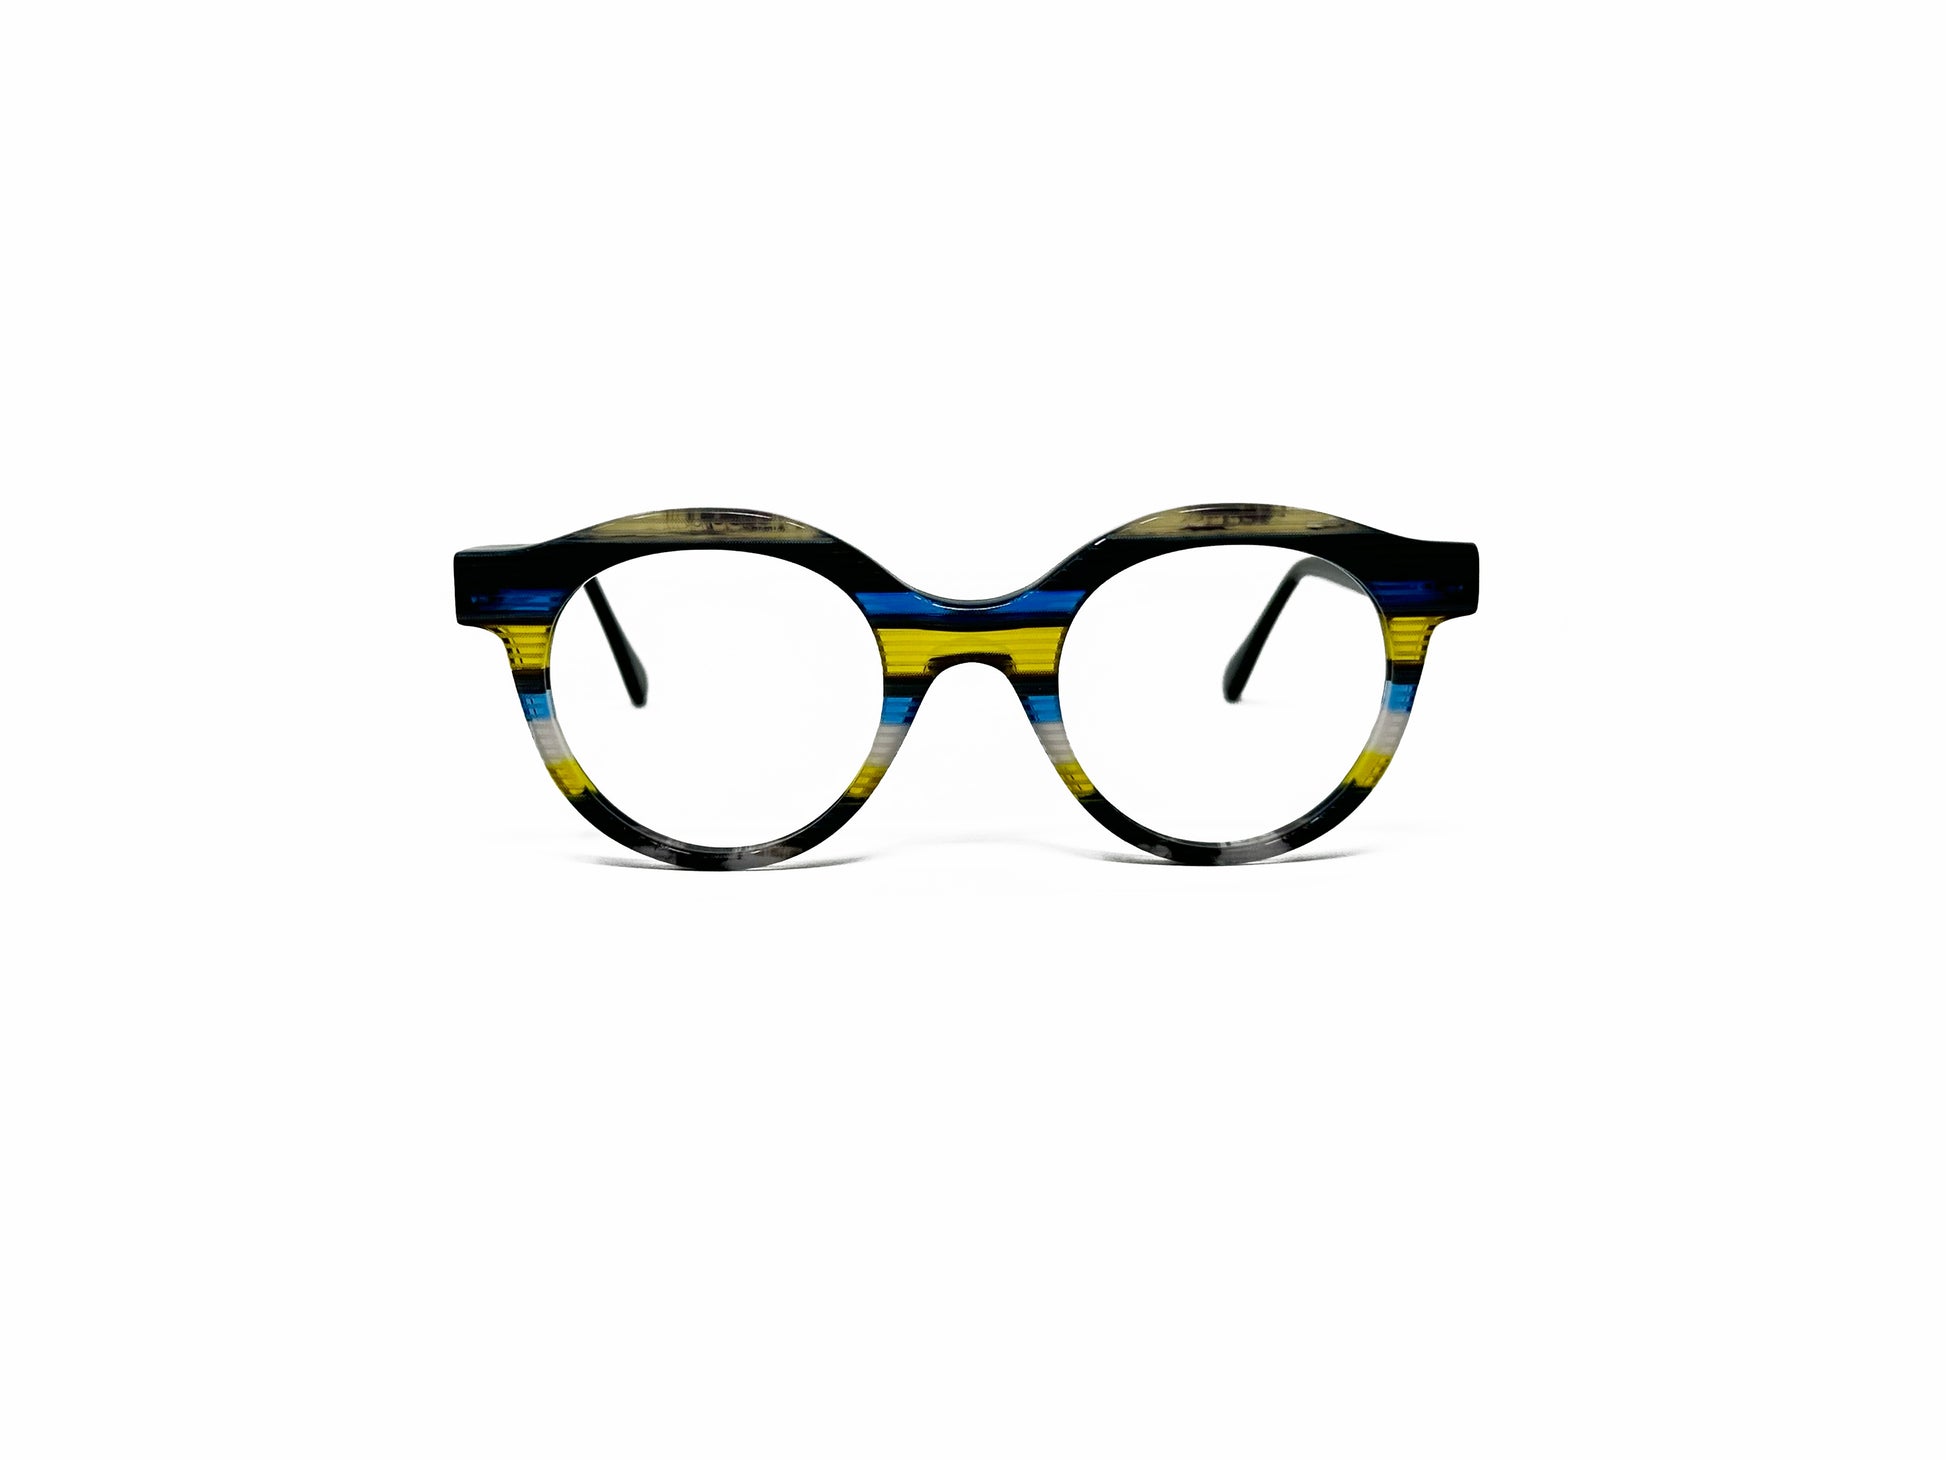 Viktlos round acetate optical frame. Model: 3160. Color: 1778RE85 - Blue, yellow, and clear stripes. Front view. 